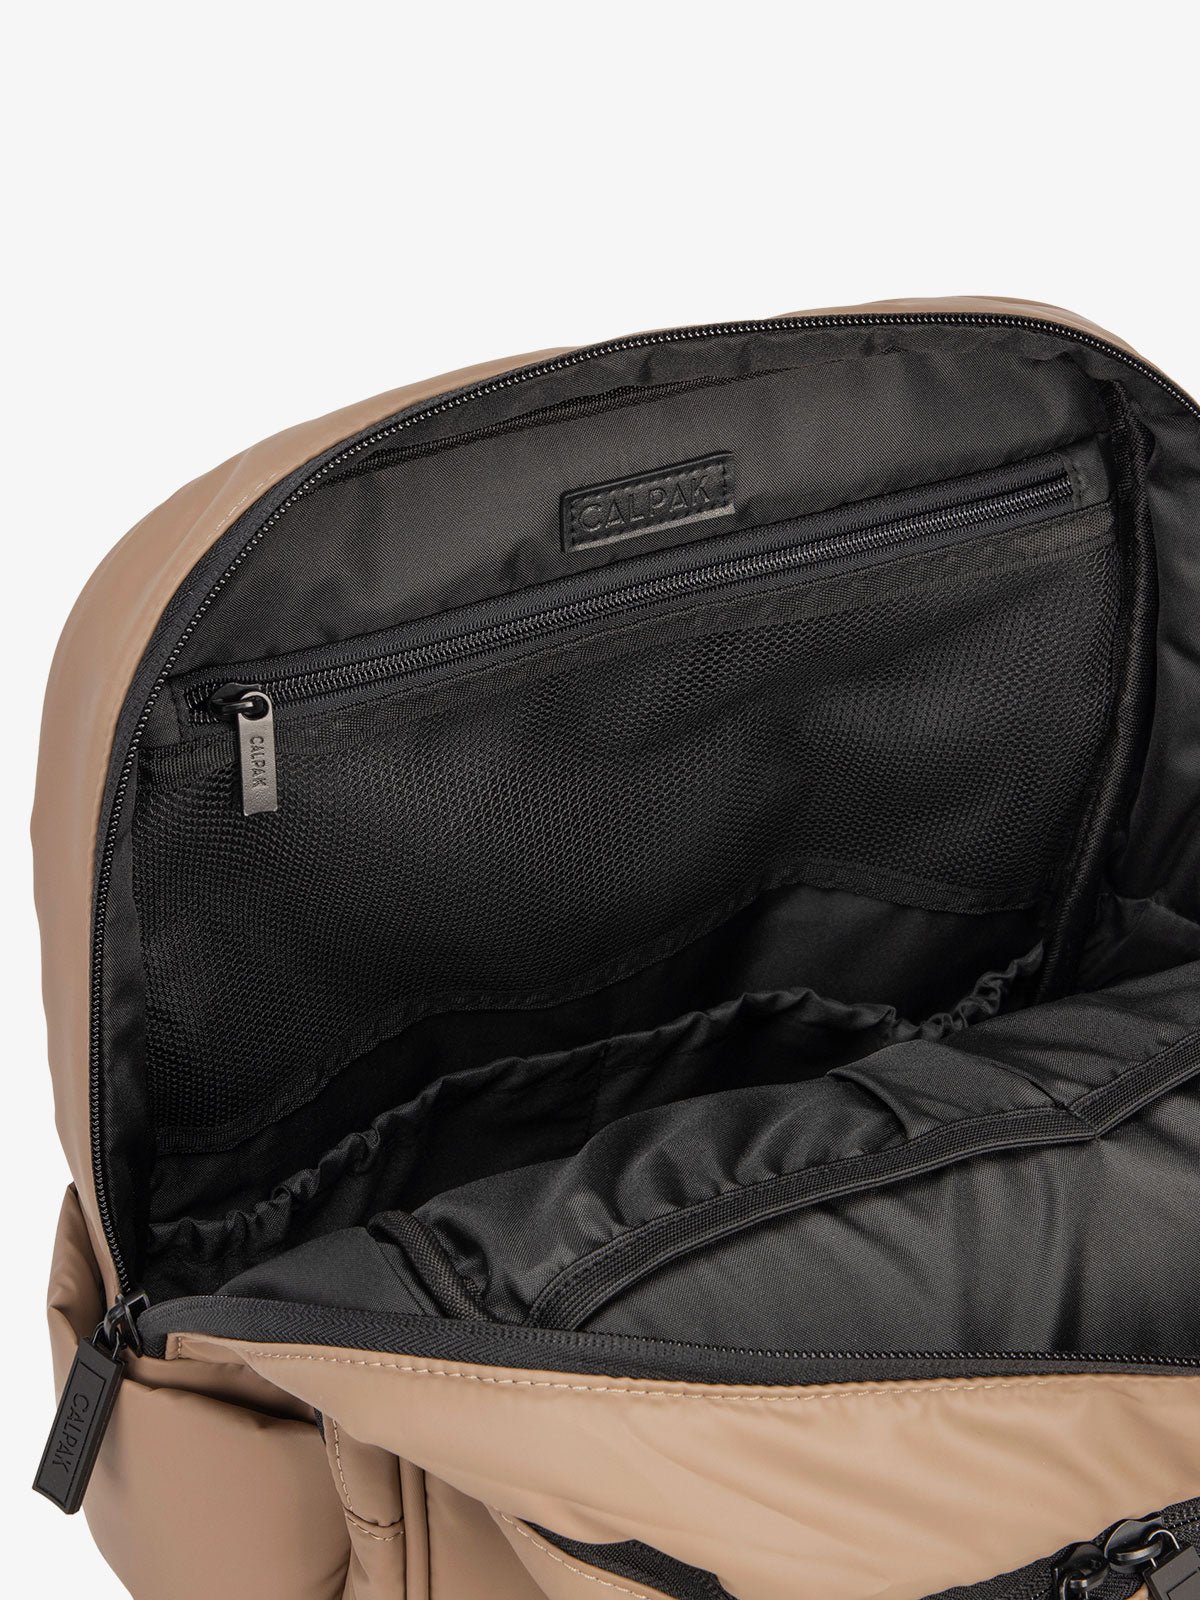 Close up of main compartment of CALPAK laptop backpack with multiple interior pockets in chocolate